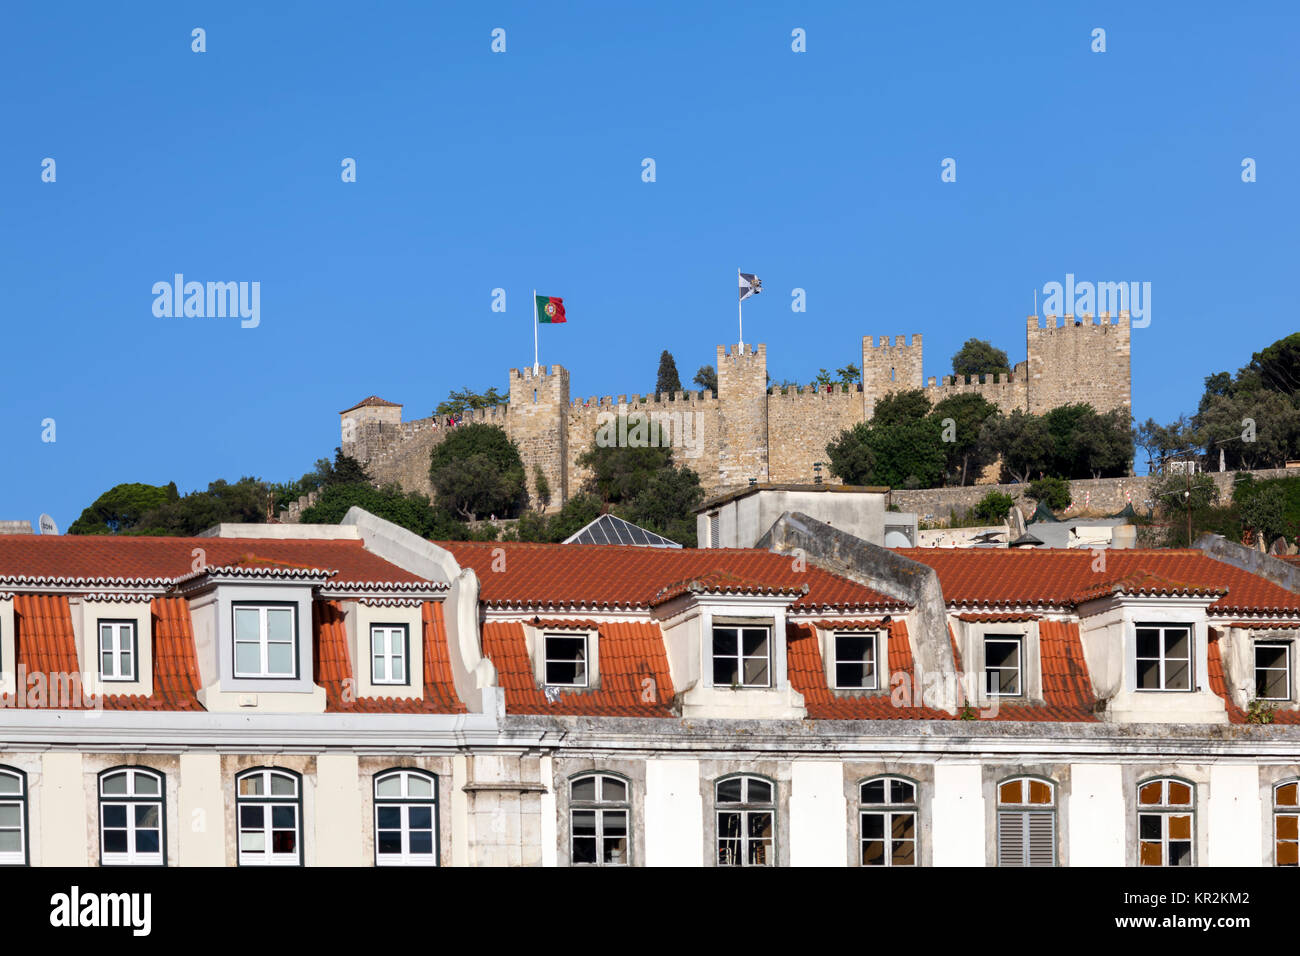 Sao Jorge Castle in Lisbon, Portugal, one of the main tourist sites of the city, constructed during the Moorish occupation of Lisbon. Stock Photo